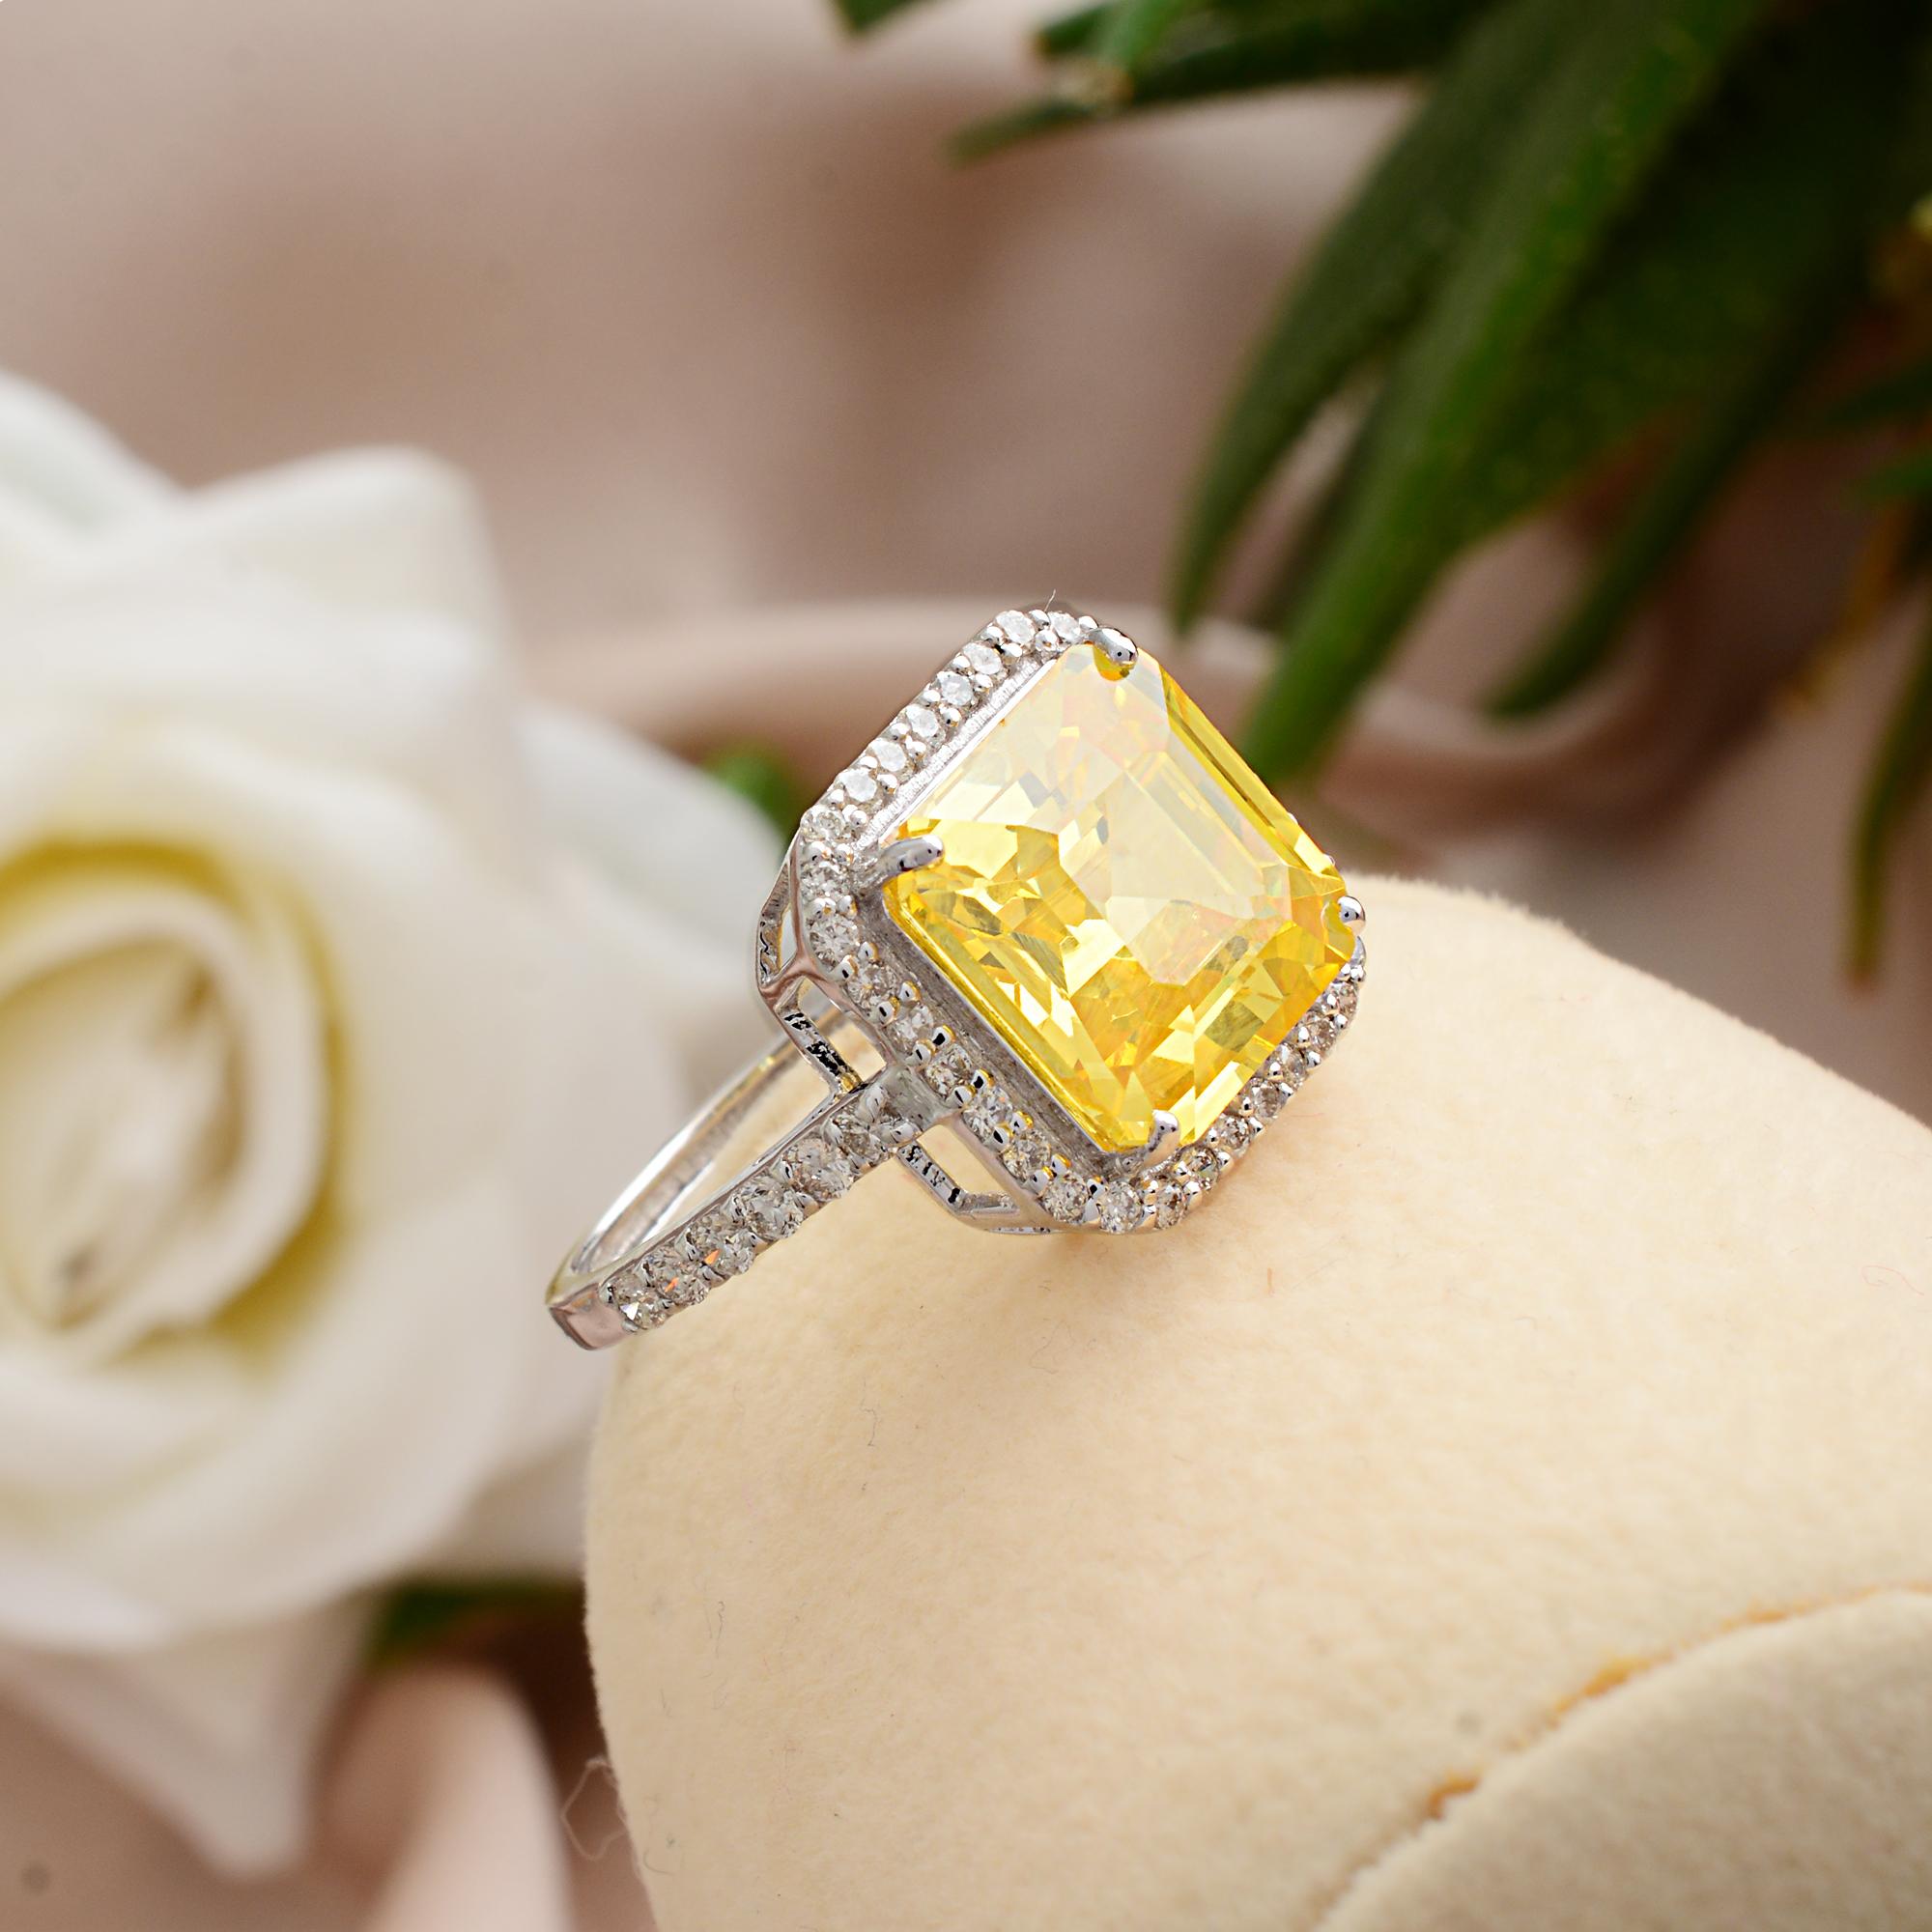 For Sale:  Yellow Processed Gemstone Cocktail Ring Diamond Pave 18k White Gold Fine Jewelry 5